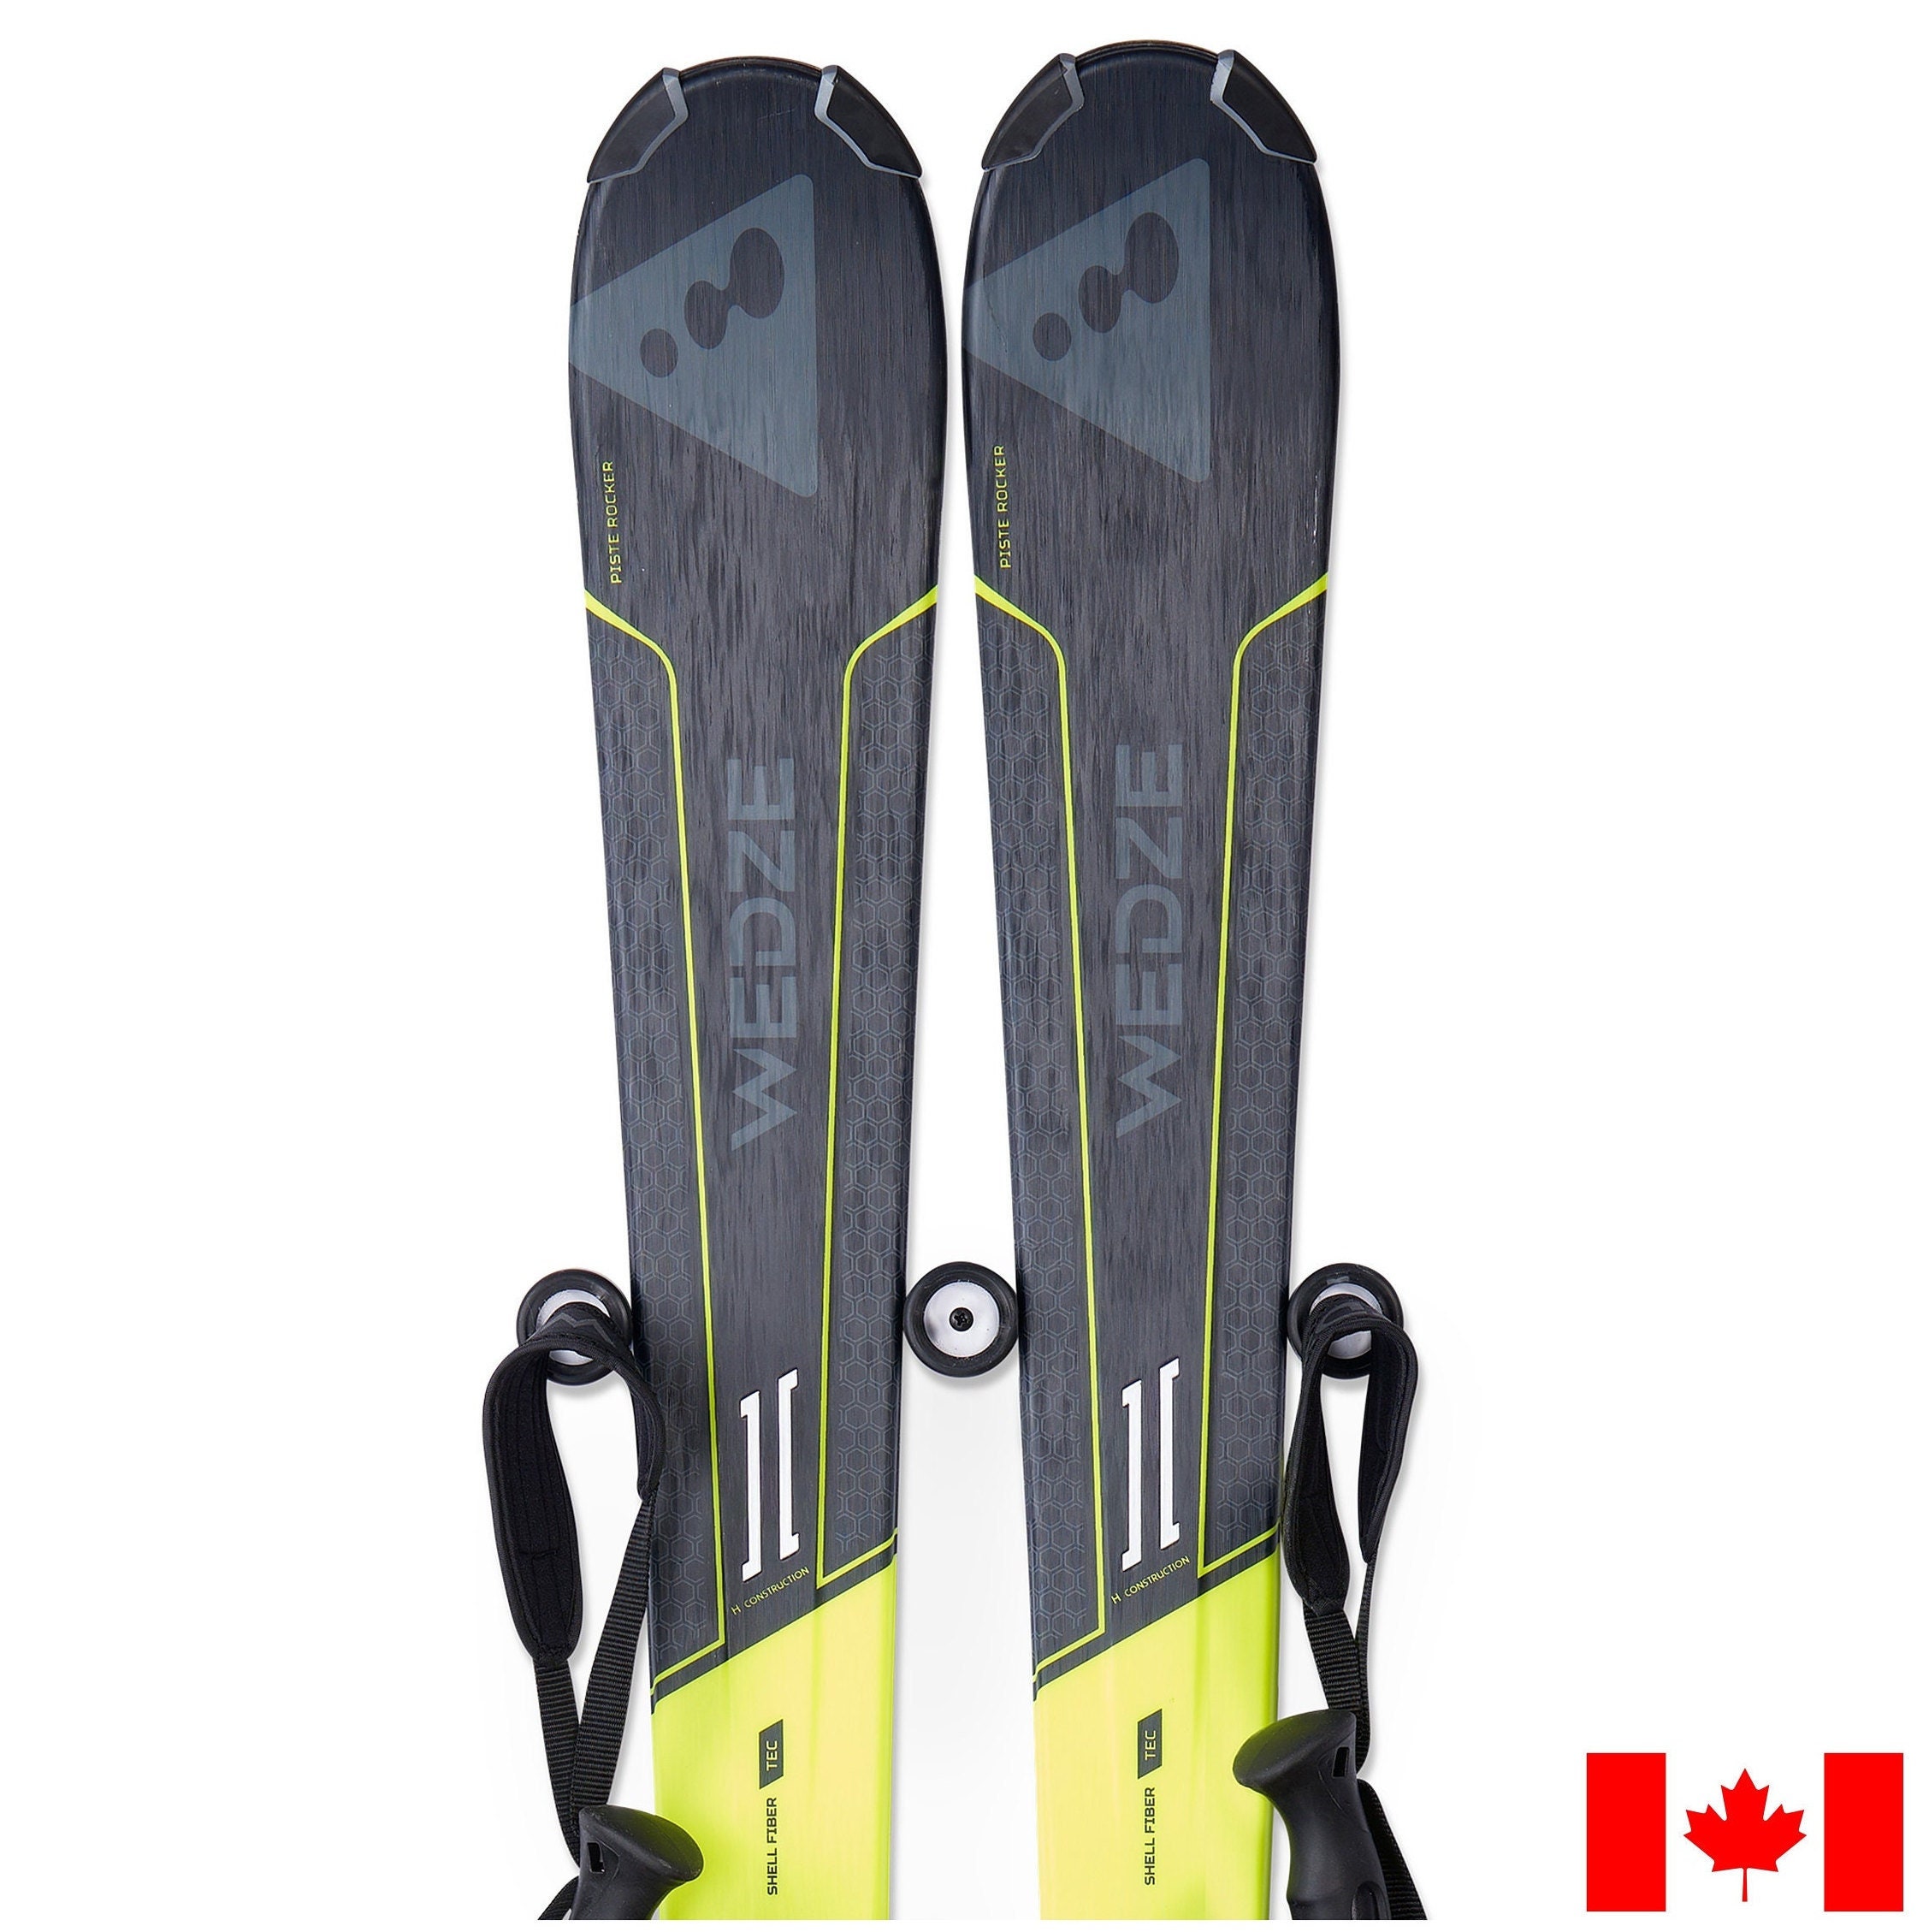 Wall Mounted Skis Snow Blades Display Hangers Brackets Hook Holder Keeper Stand 